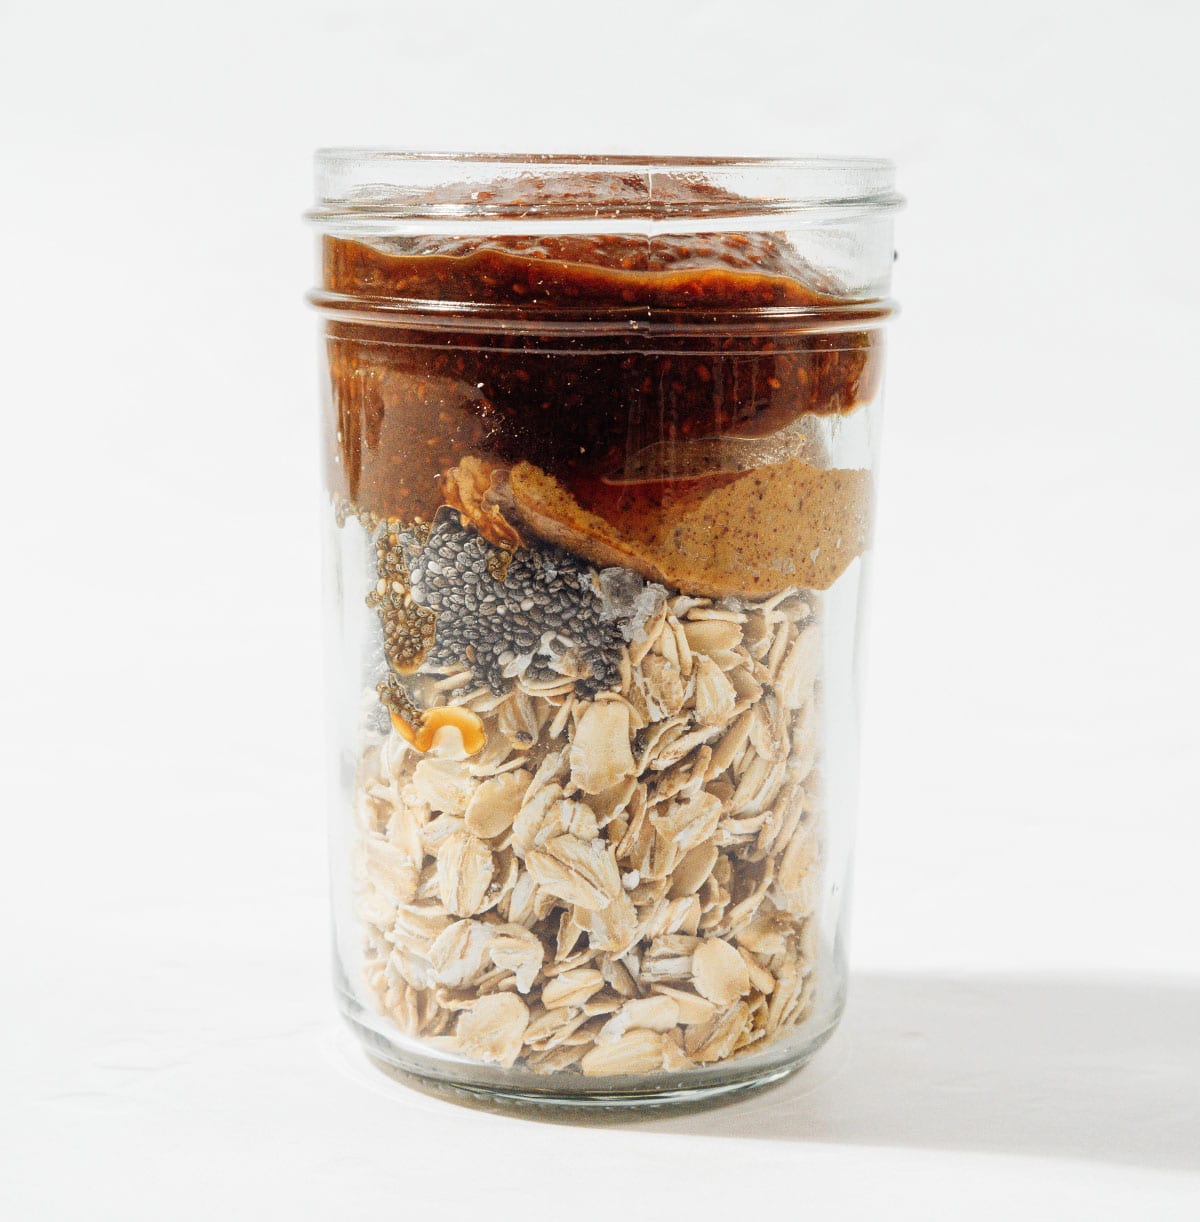 Ingredients for PB & J overnight oats in a jar.